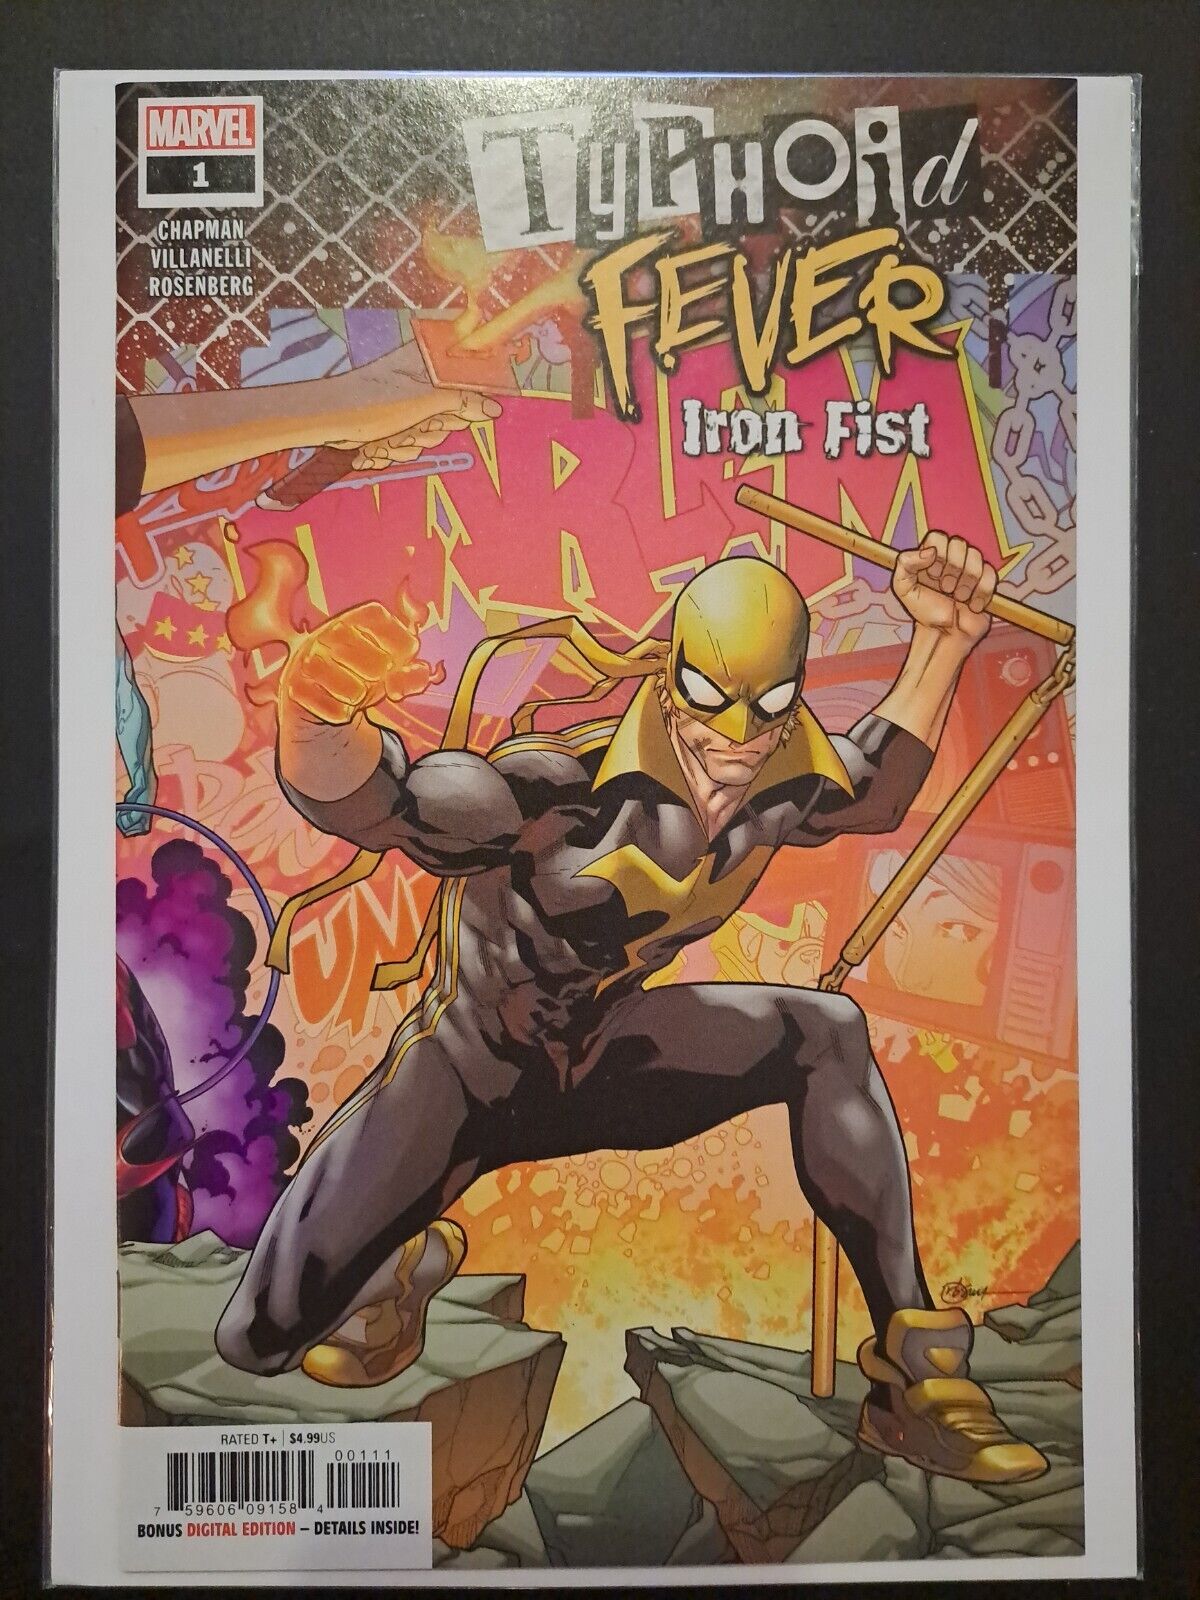 Typhoid Mary Fever #1 Iron Fist - 2019 - Combined Shipping + 10 Pics